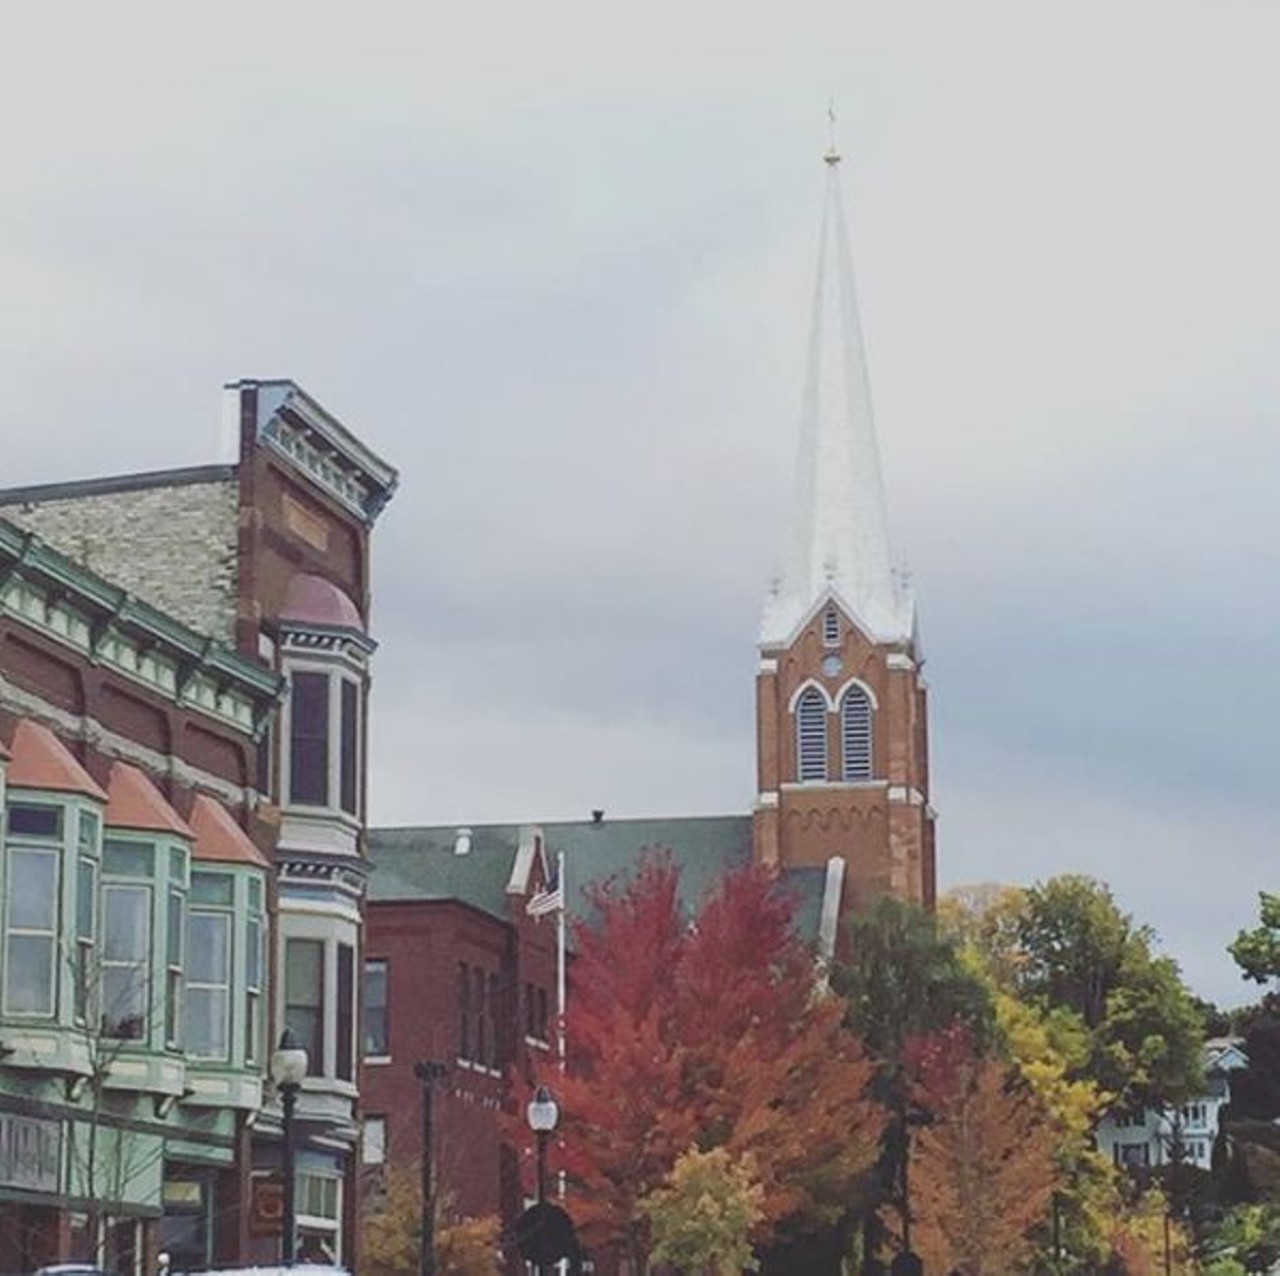 Petoskey
One place you can view the emergence of fall colors is Petoskey. The laid back atmosphere of the city goes perfectly with watching the leaves change. There are also plenty of shops and restaurants to go to enjoy yourself when you&#146;re done. Photo via Instagram user, Jackleena